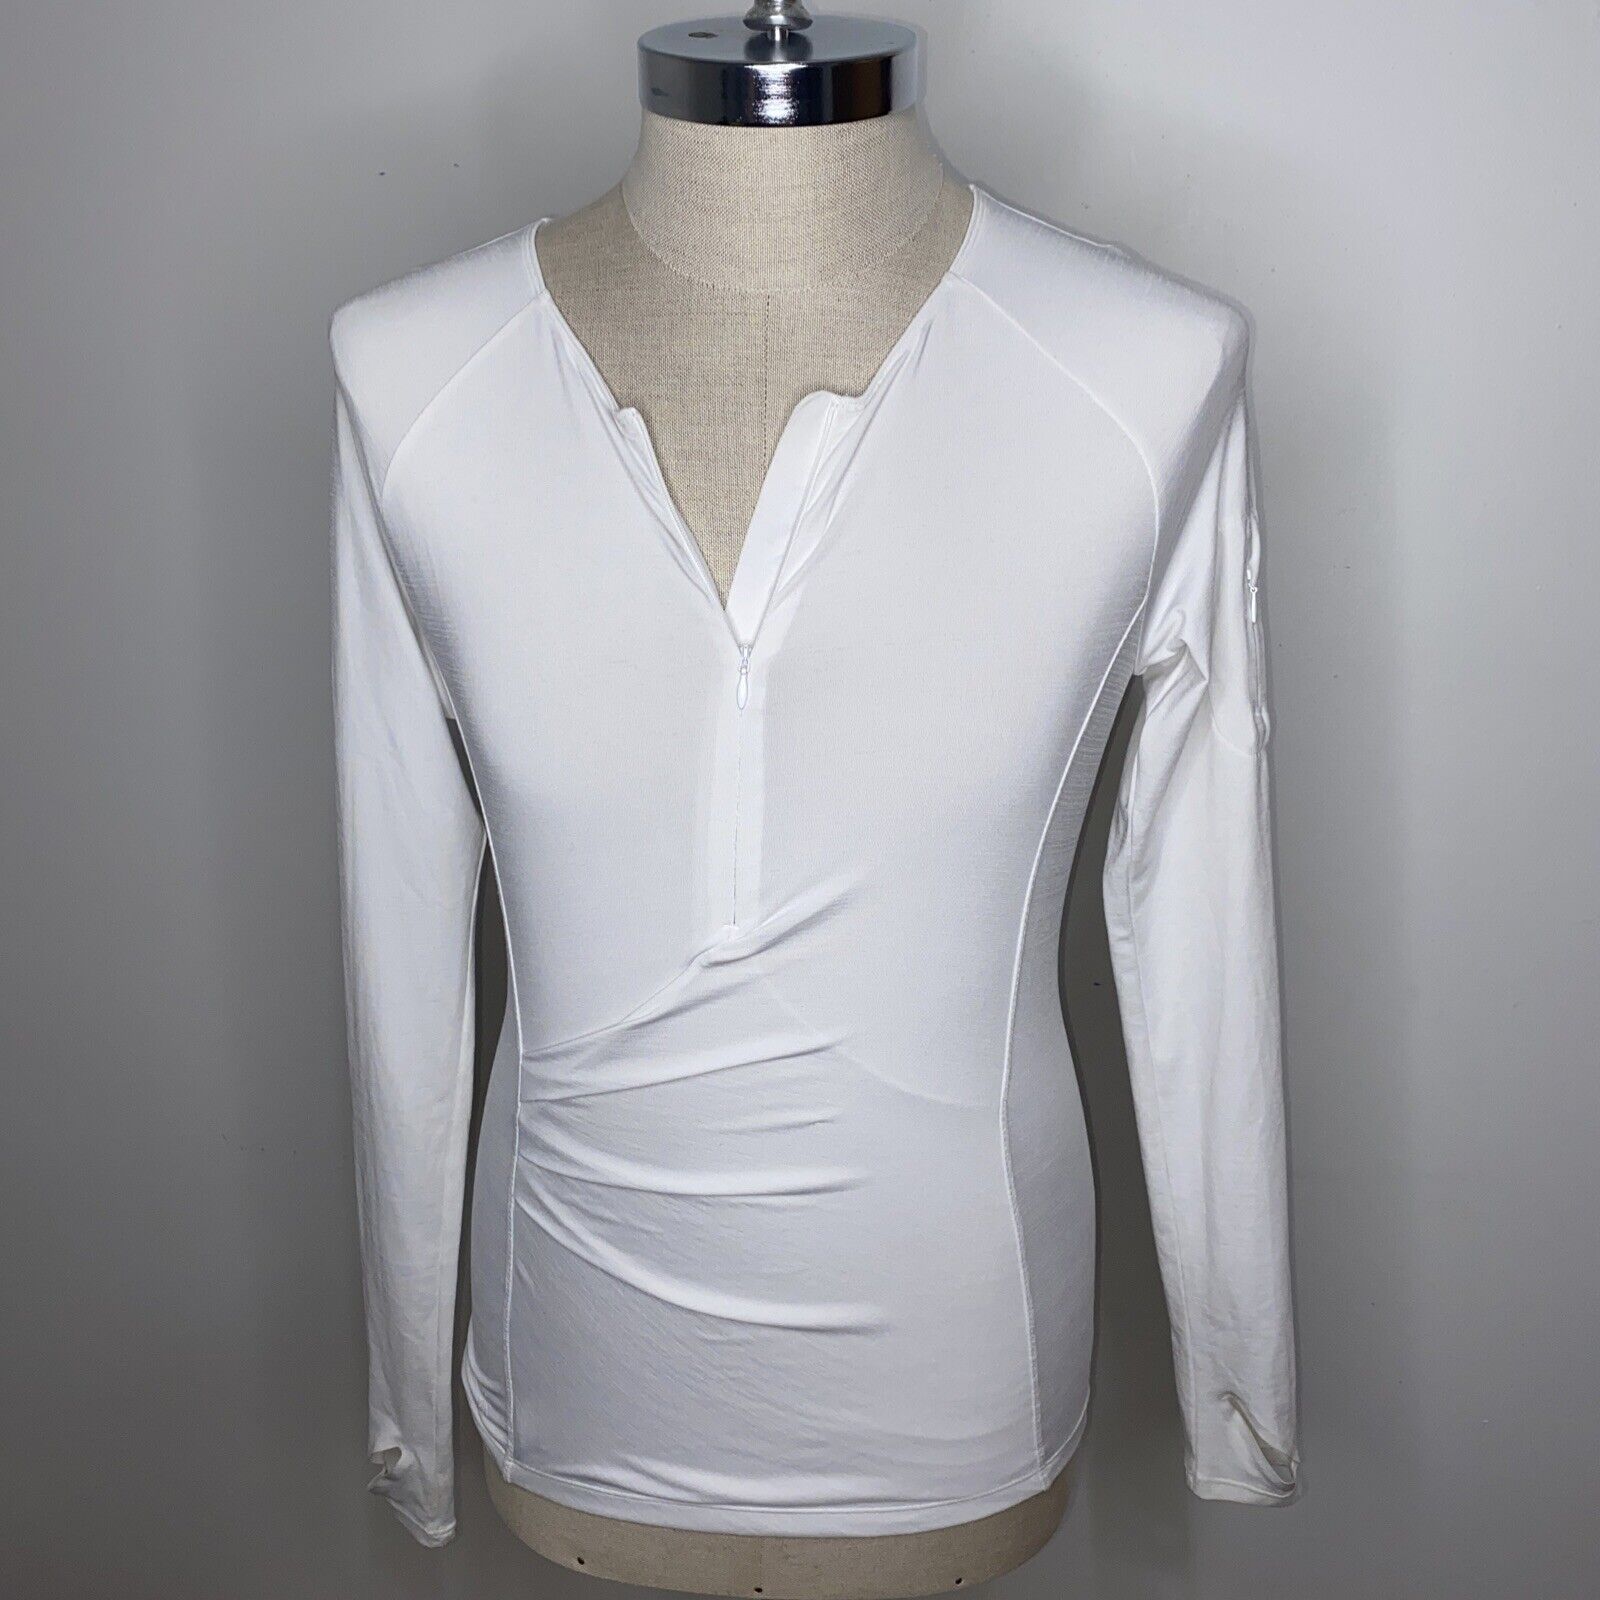 Athleta Womens Shirt Sz S White  1/4 Zip Neck Top Ruched Athletic Long Sleeve